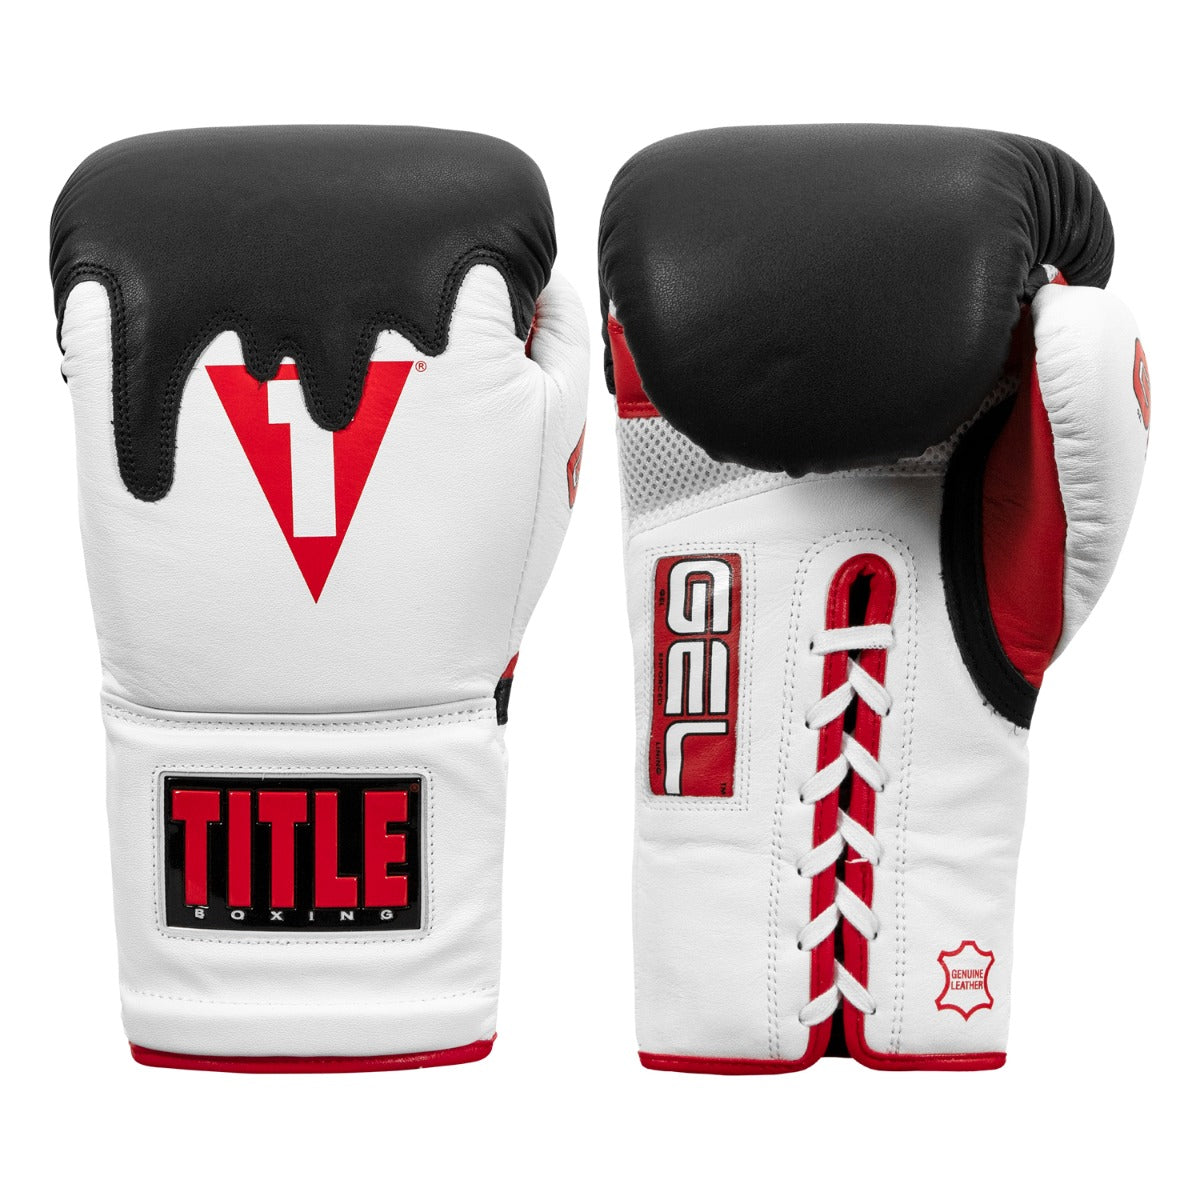 TITLE GEL Lava Leather Series Sparring Gloves